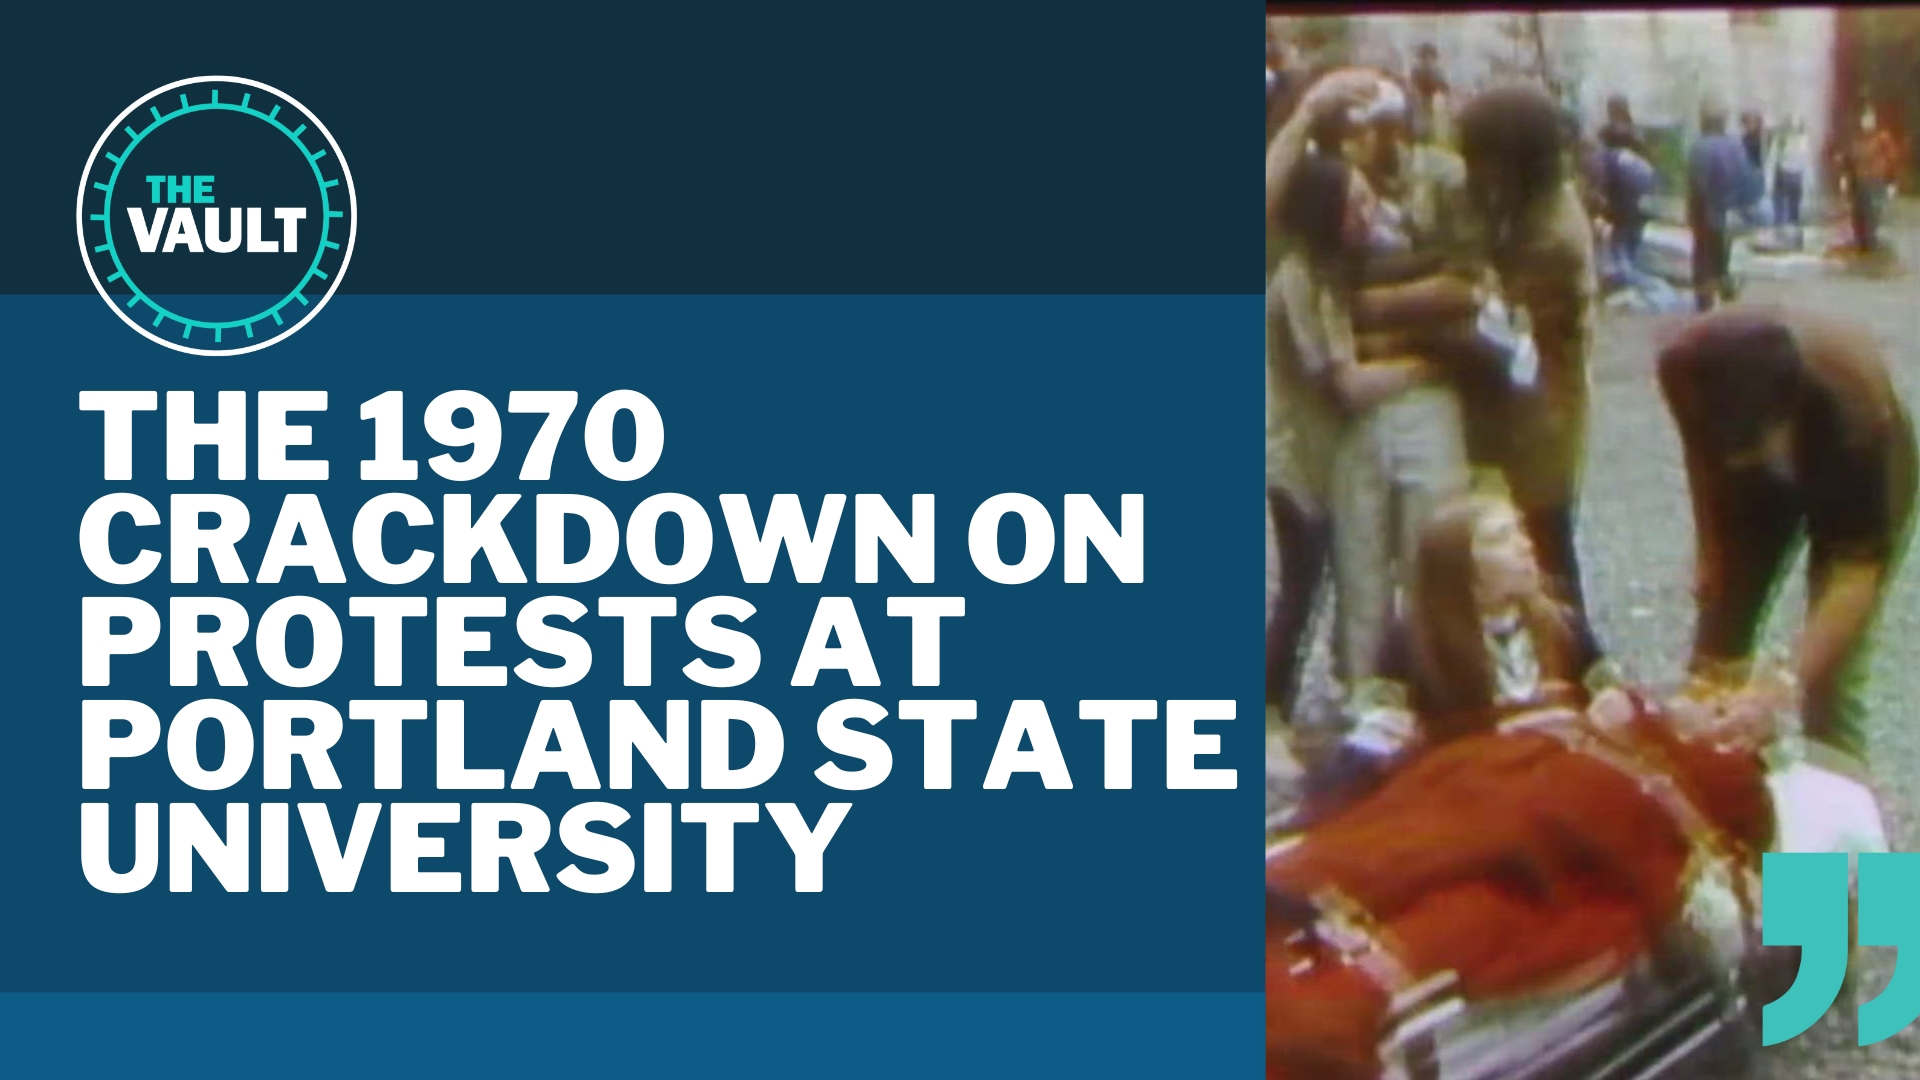 In May 1970, PSU students were gathered in the Park Blocks when riot police pushed in, leading to a violent clash. The event redoubled protest efforts.